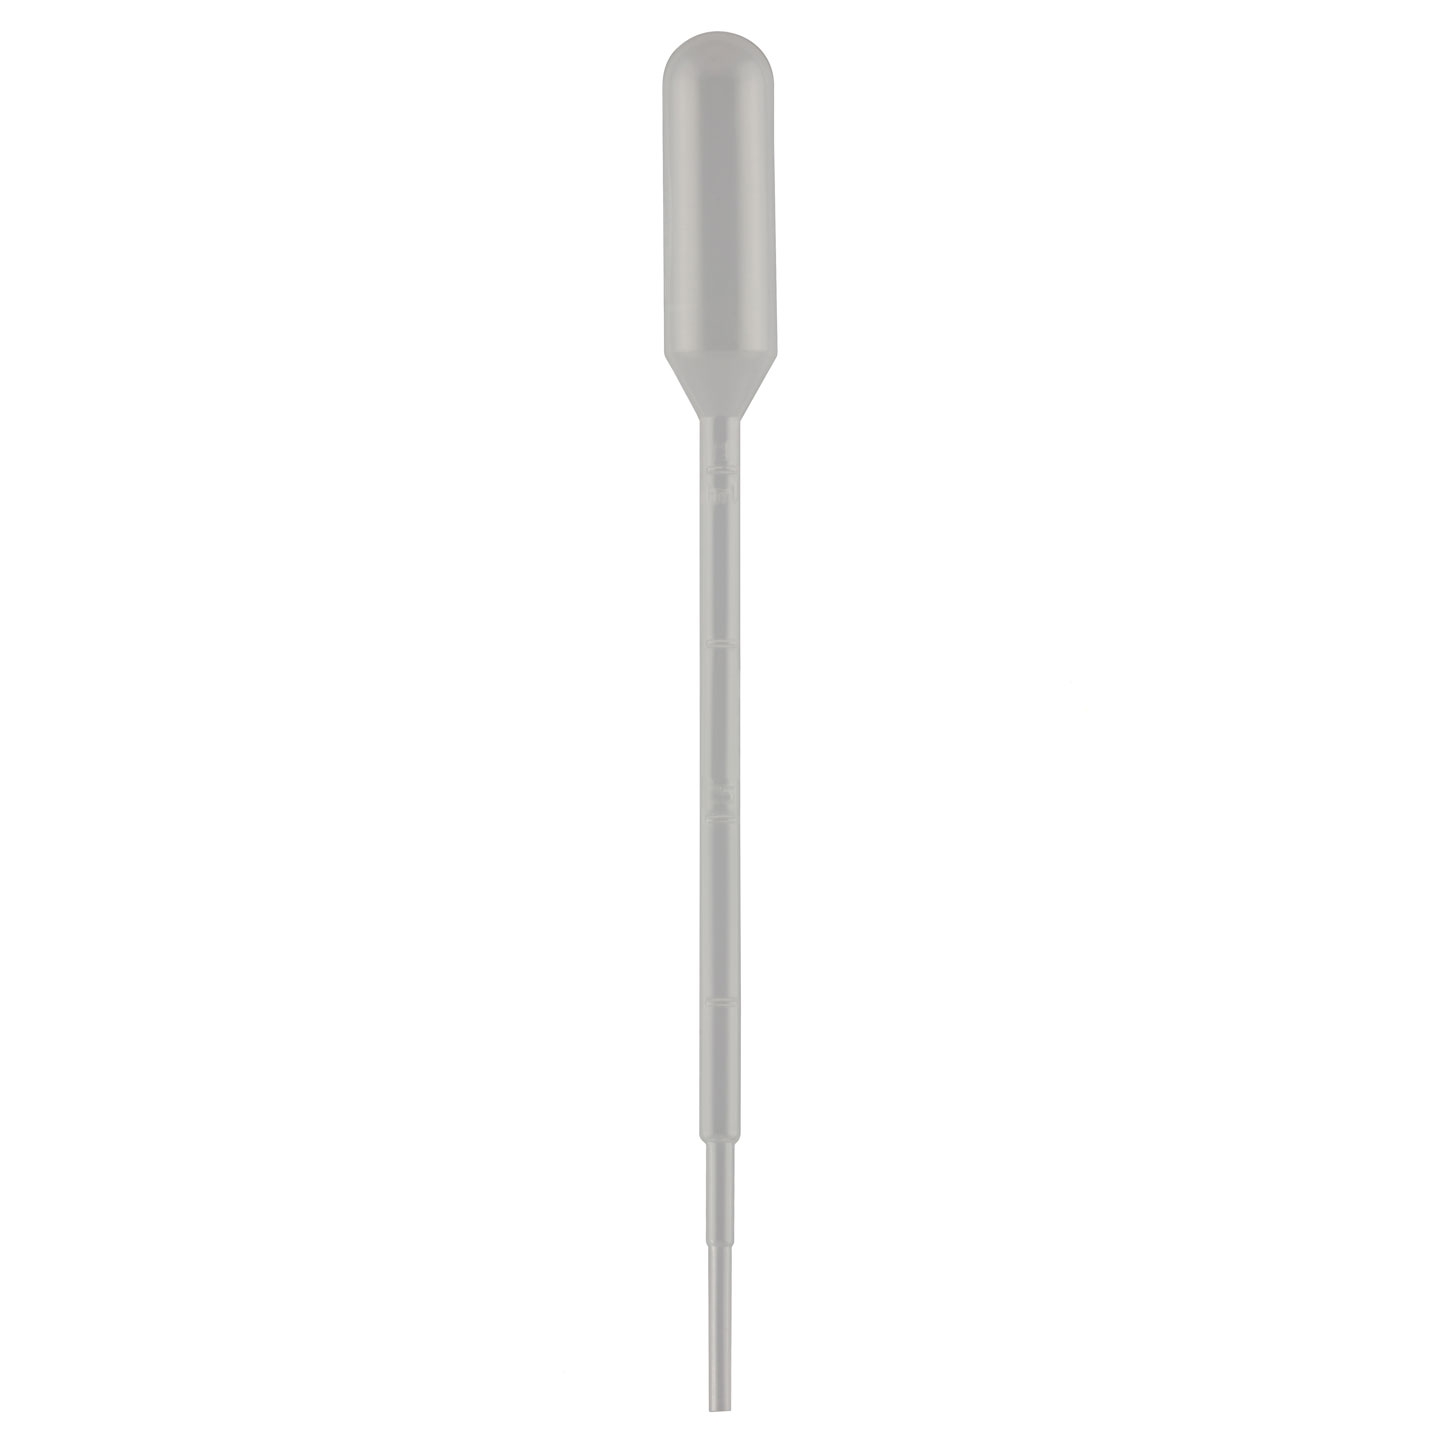 Pasteur Pipette 1ml, 160mm, Sterile, Pack Of 500pipettes In 20s